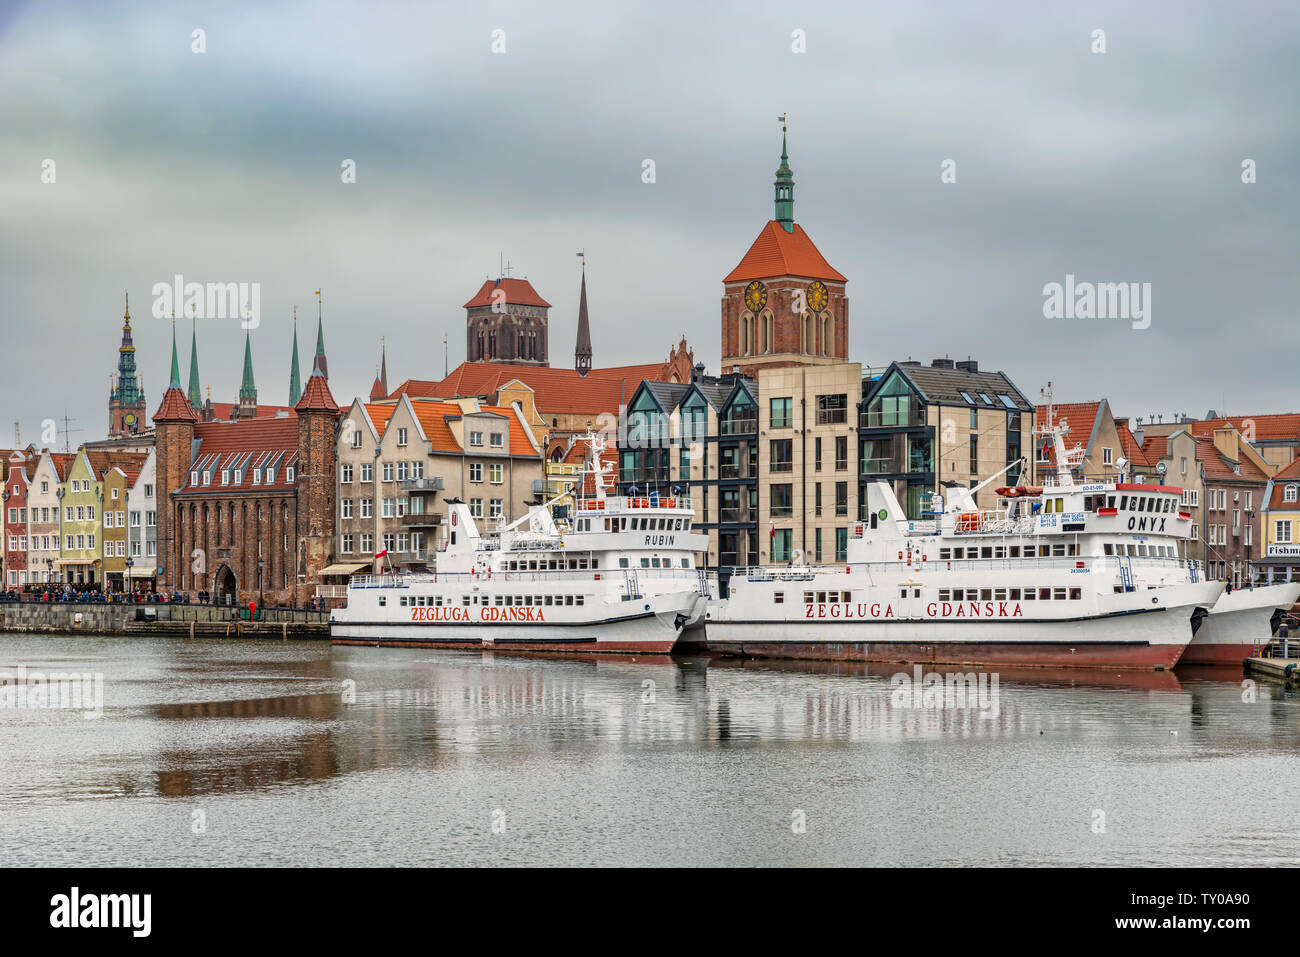 Gdansk, Poland – Feb 14, 2019: View at historic houses along Motlawa river and touris boats in the old historic town of the Gdansk city in Poland. Stock Photo